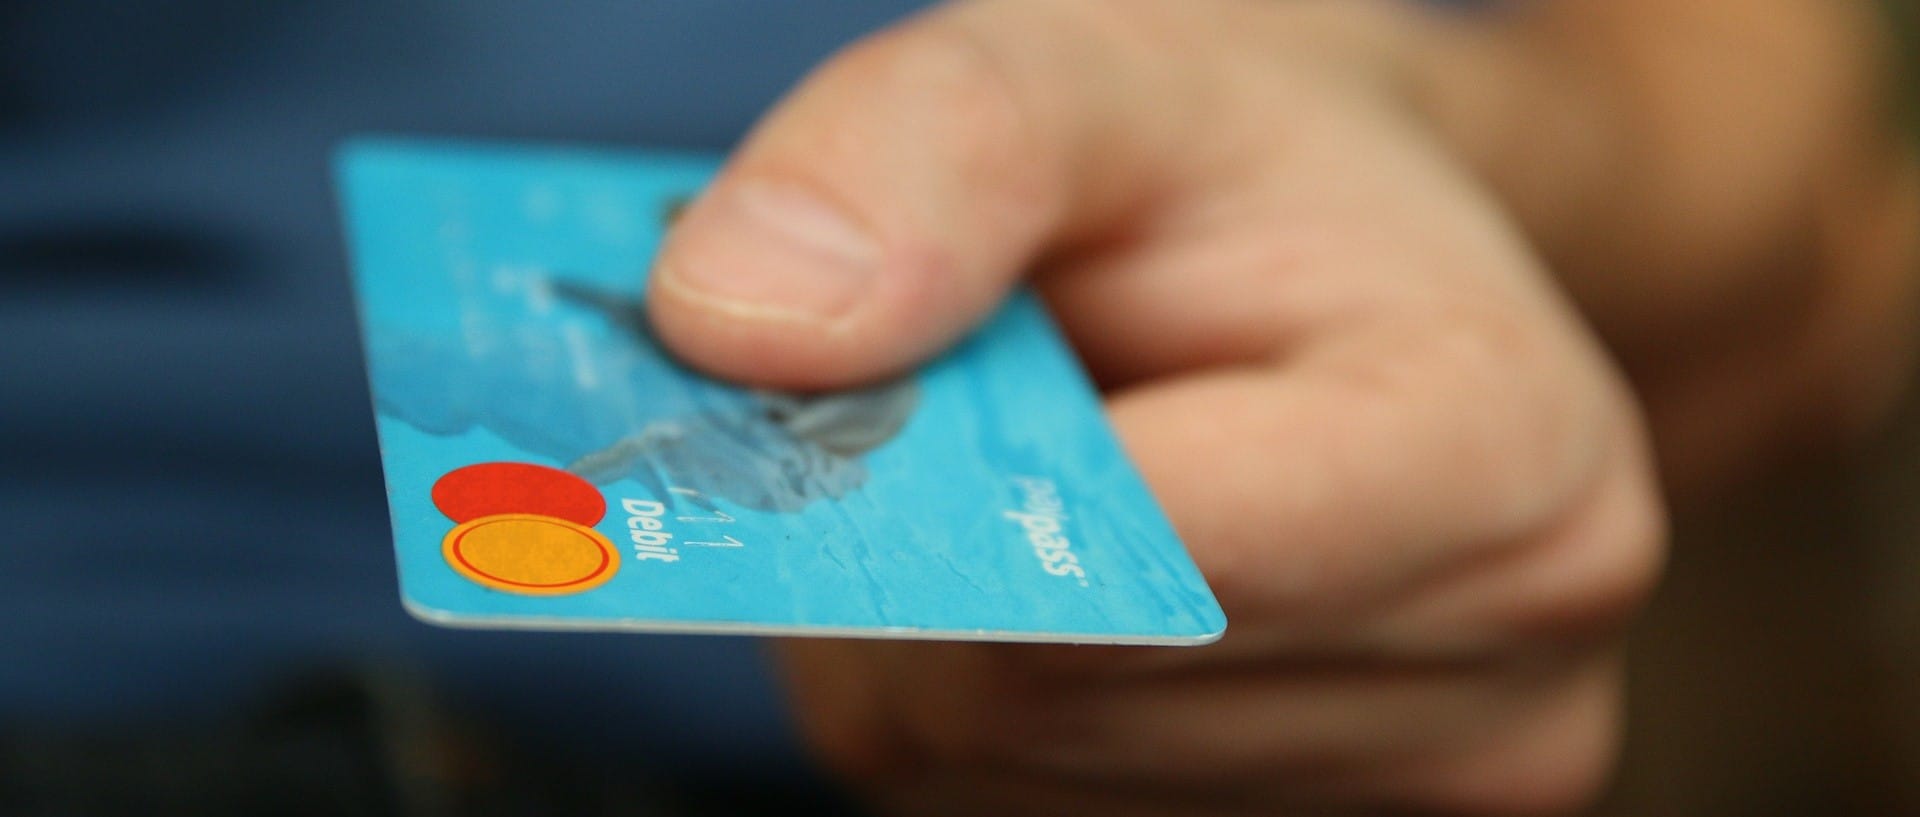 person-holding-creditcard